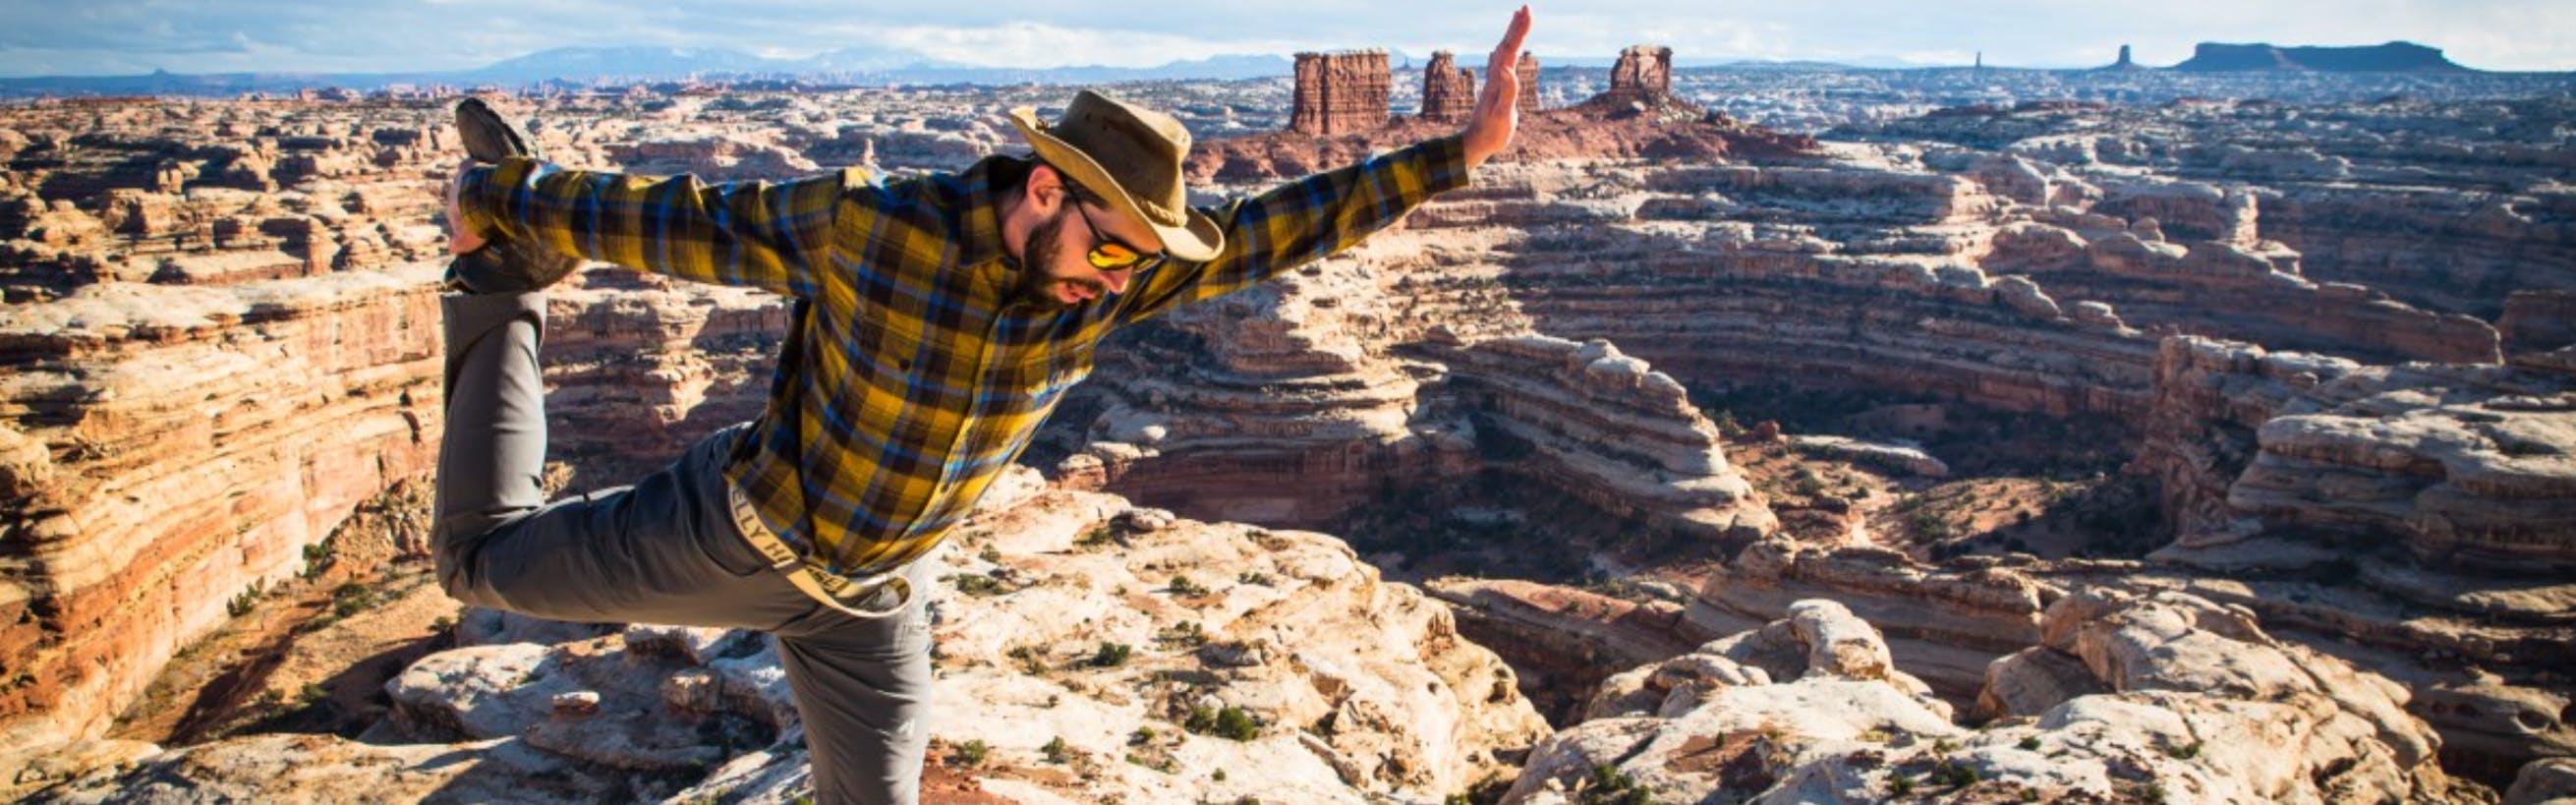 A man in a hat and a plaid shirt stretches his legs on top of a scenic outlook.